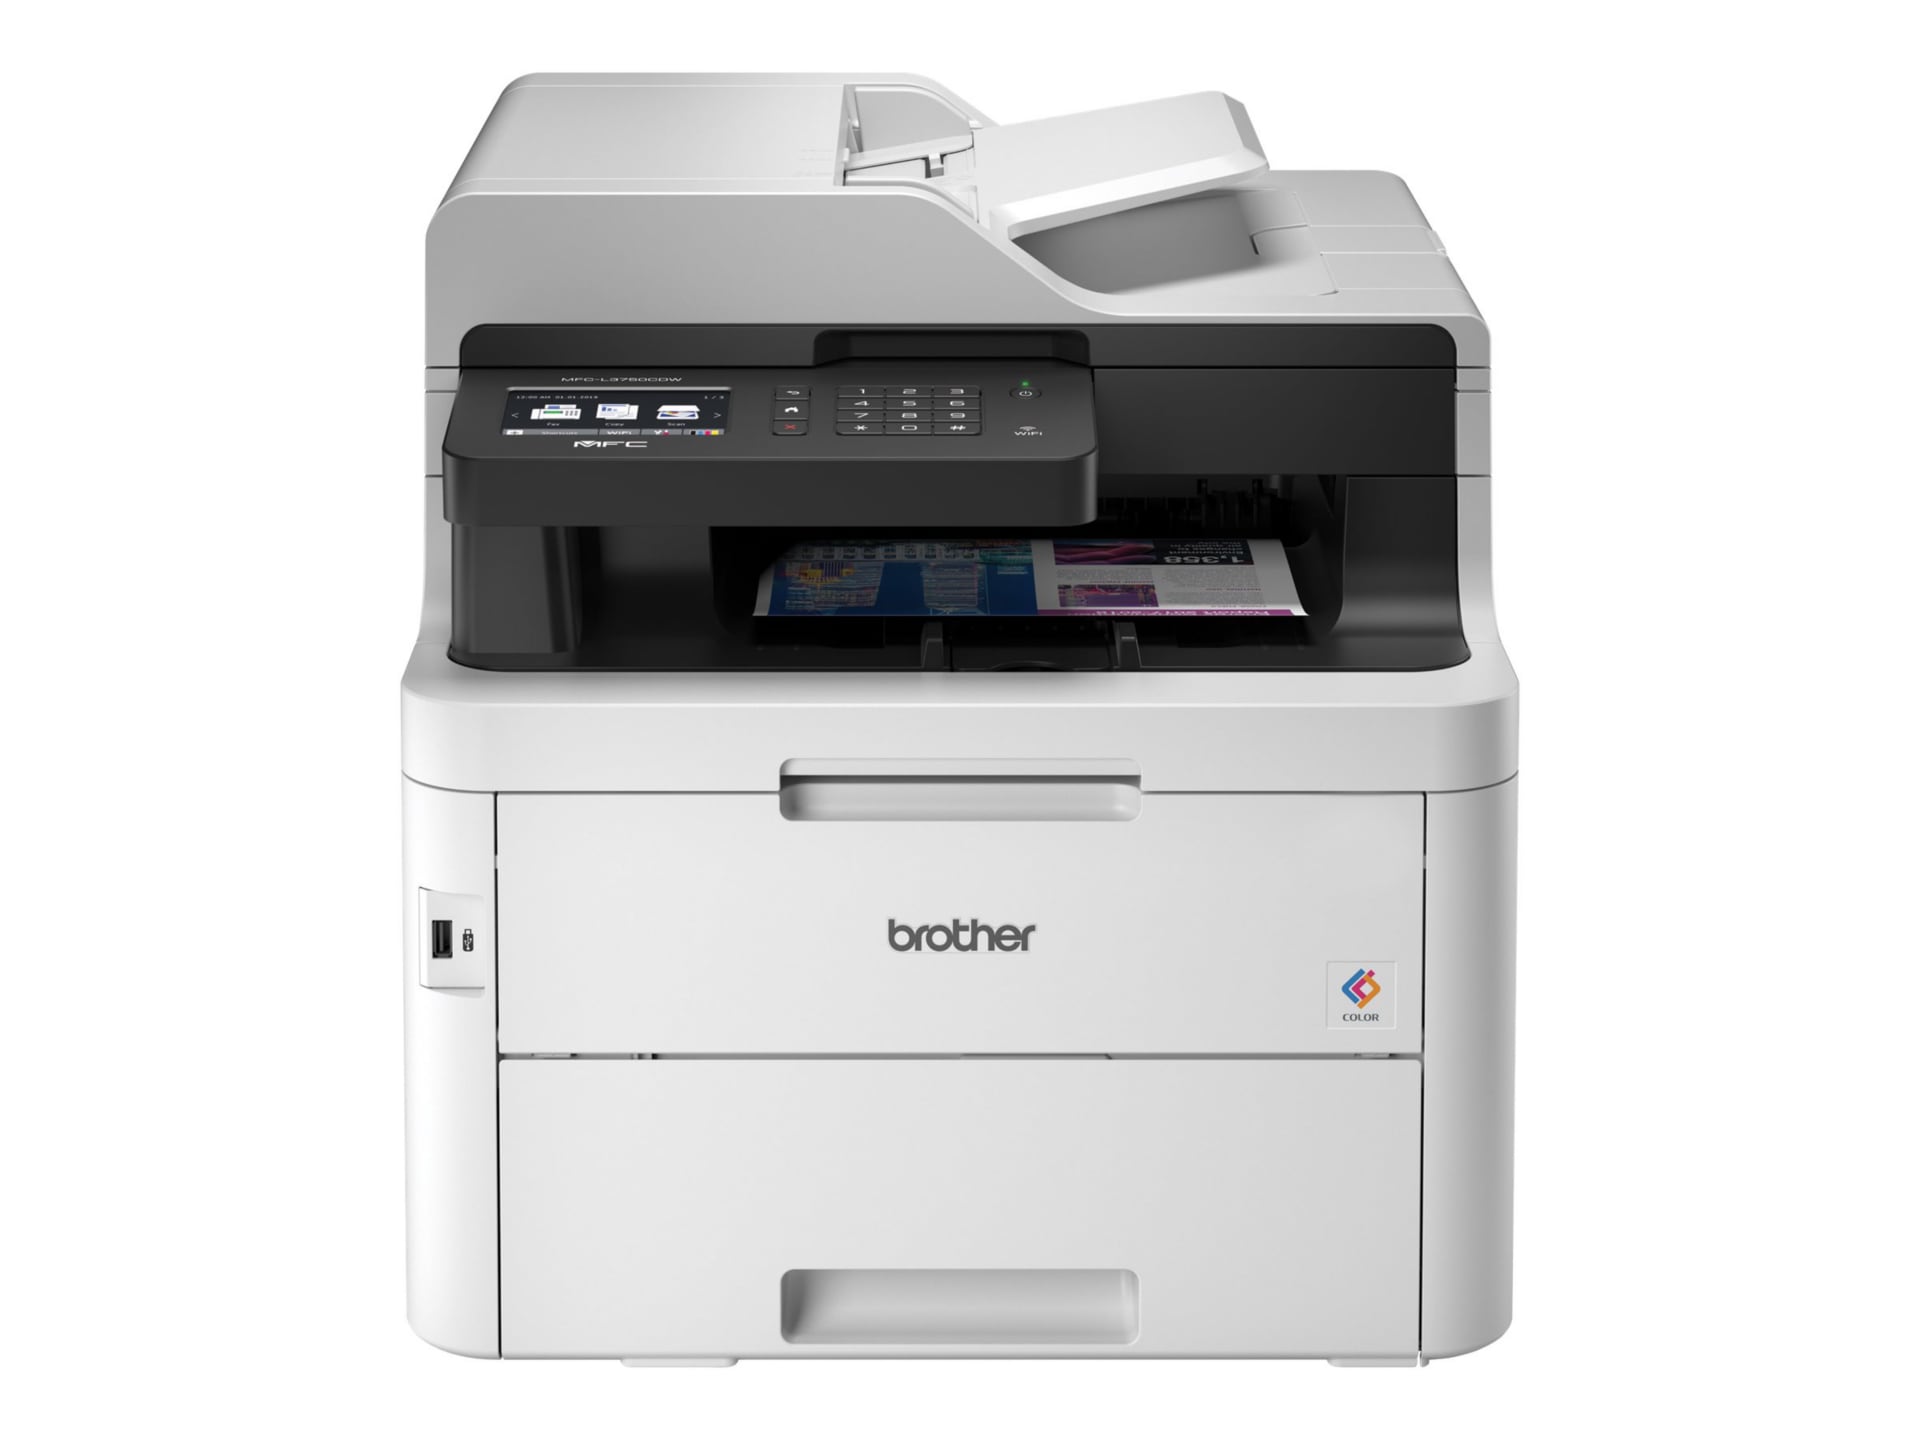 Brother MFC-L3750CDW - multifunction printer - color - MFC-L3750CDW -  All-in-One Printers 